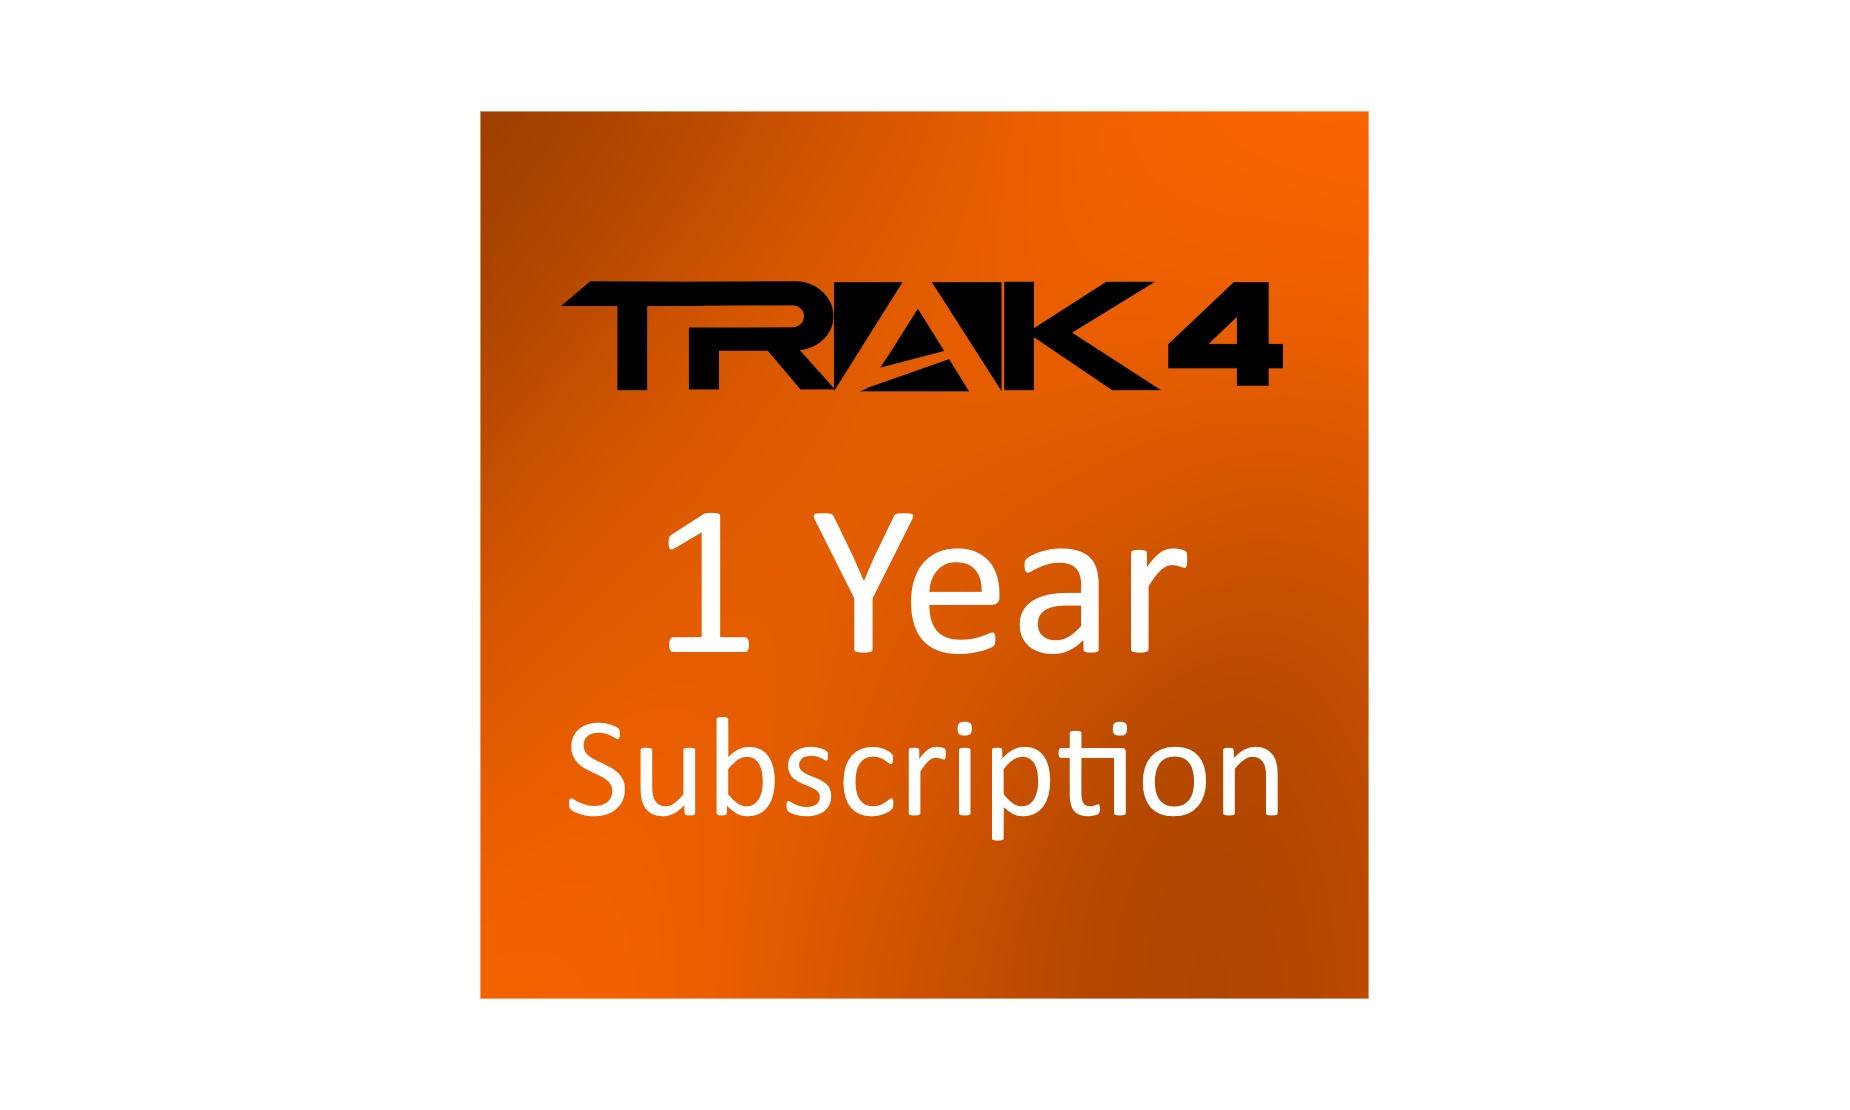 1 Year Subscription